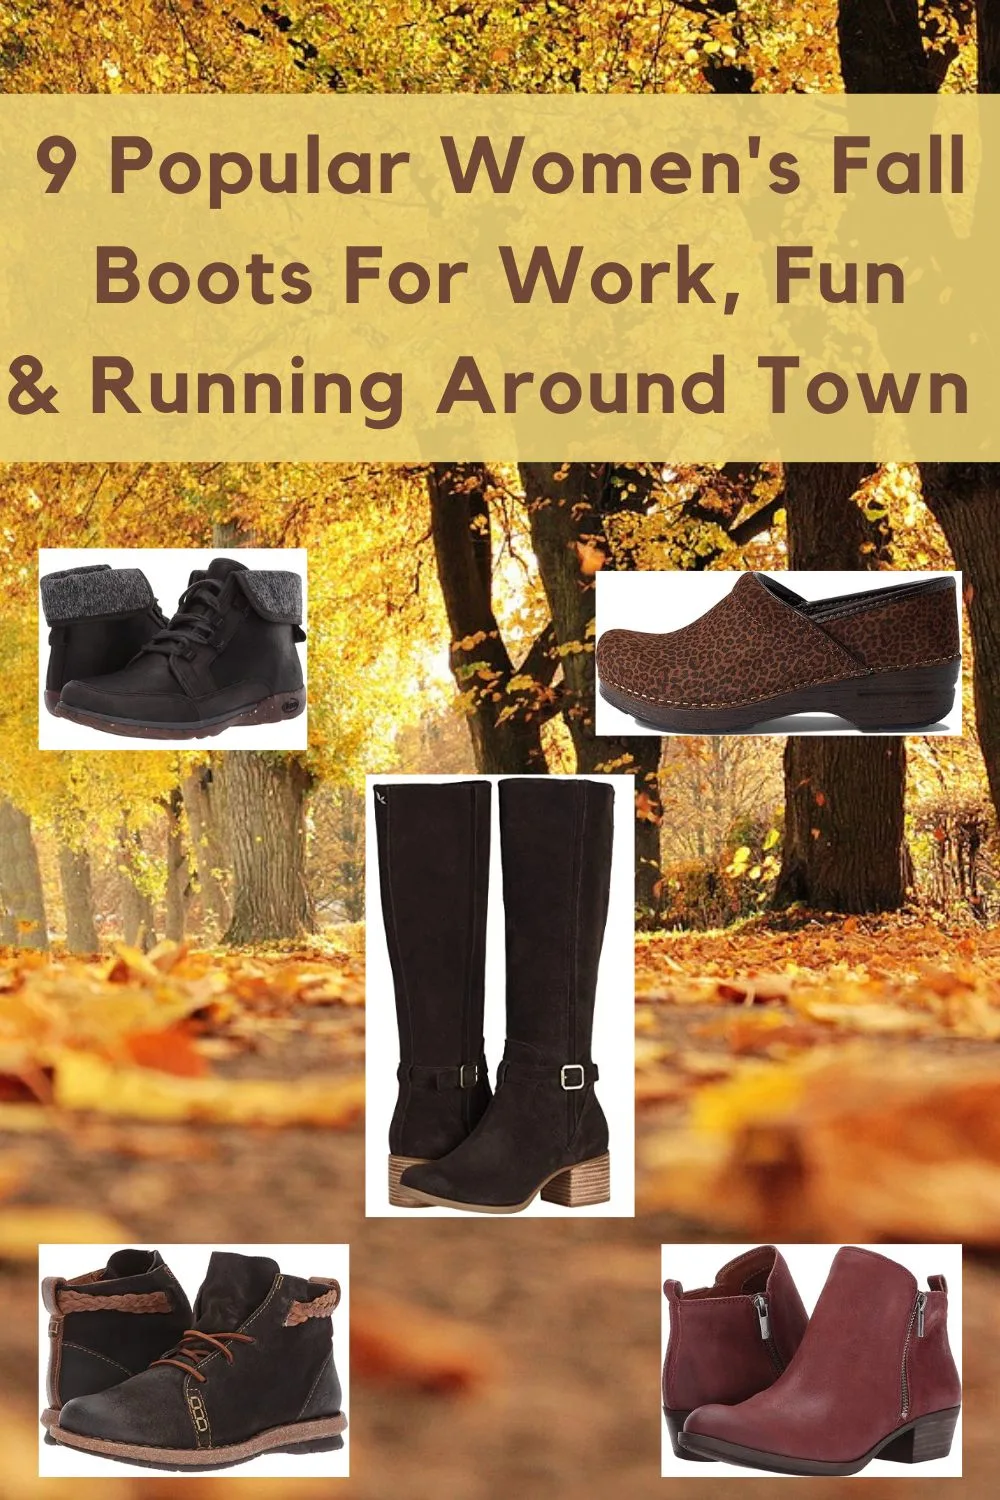 fall brings busy weekends, brisk days and our last chance to grab some sunshine before winter. here are 13 pairs of women's boots to keep you warm, comfortable and looking good all season long. 